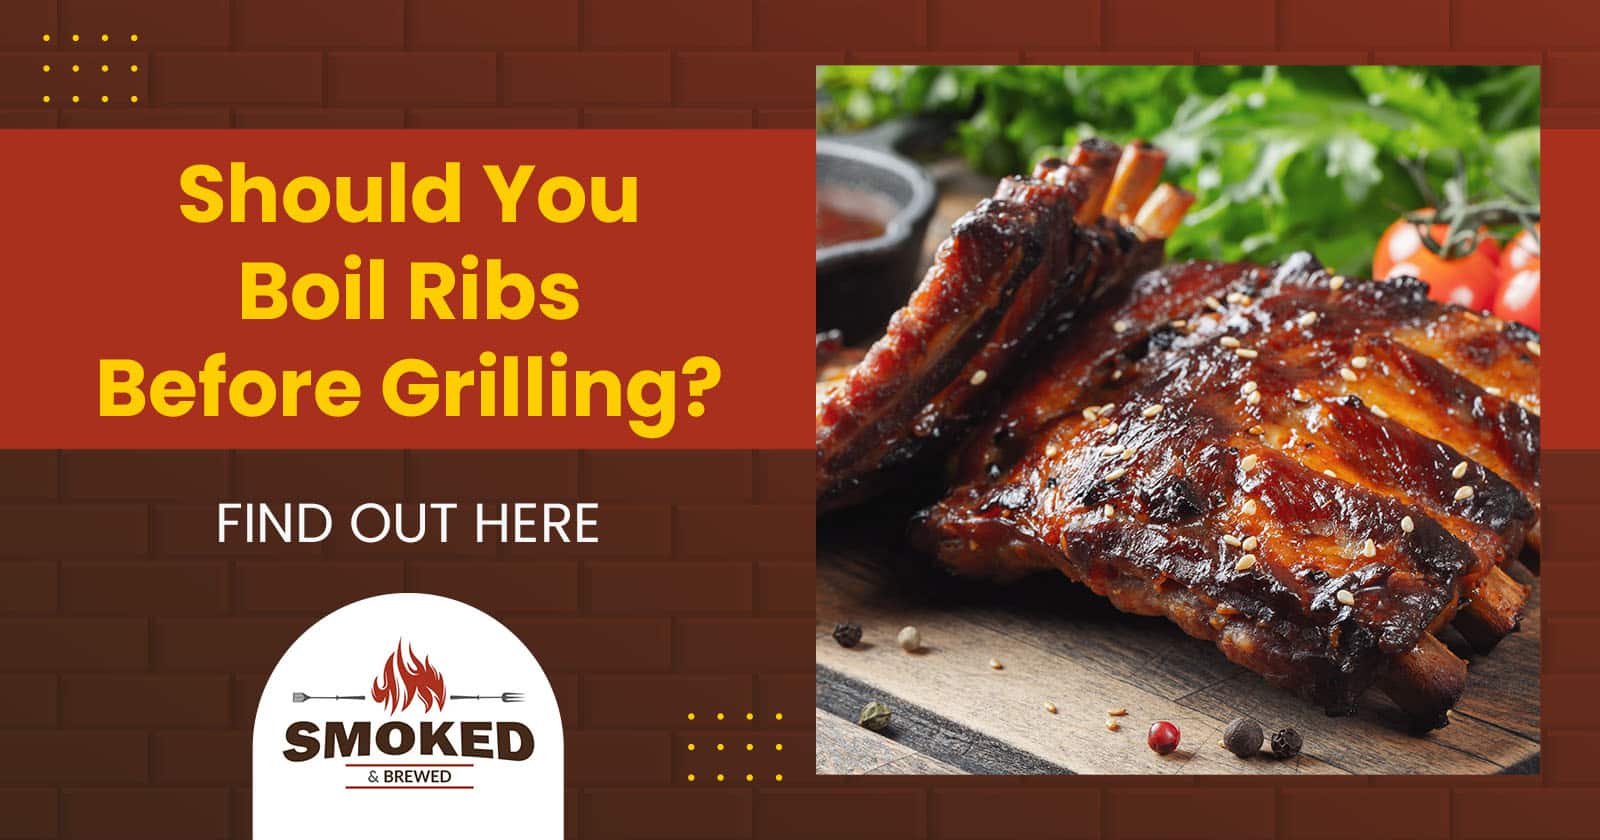 how long to boil ribs before grilling